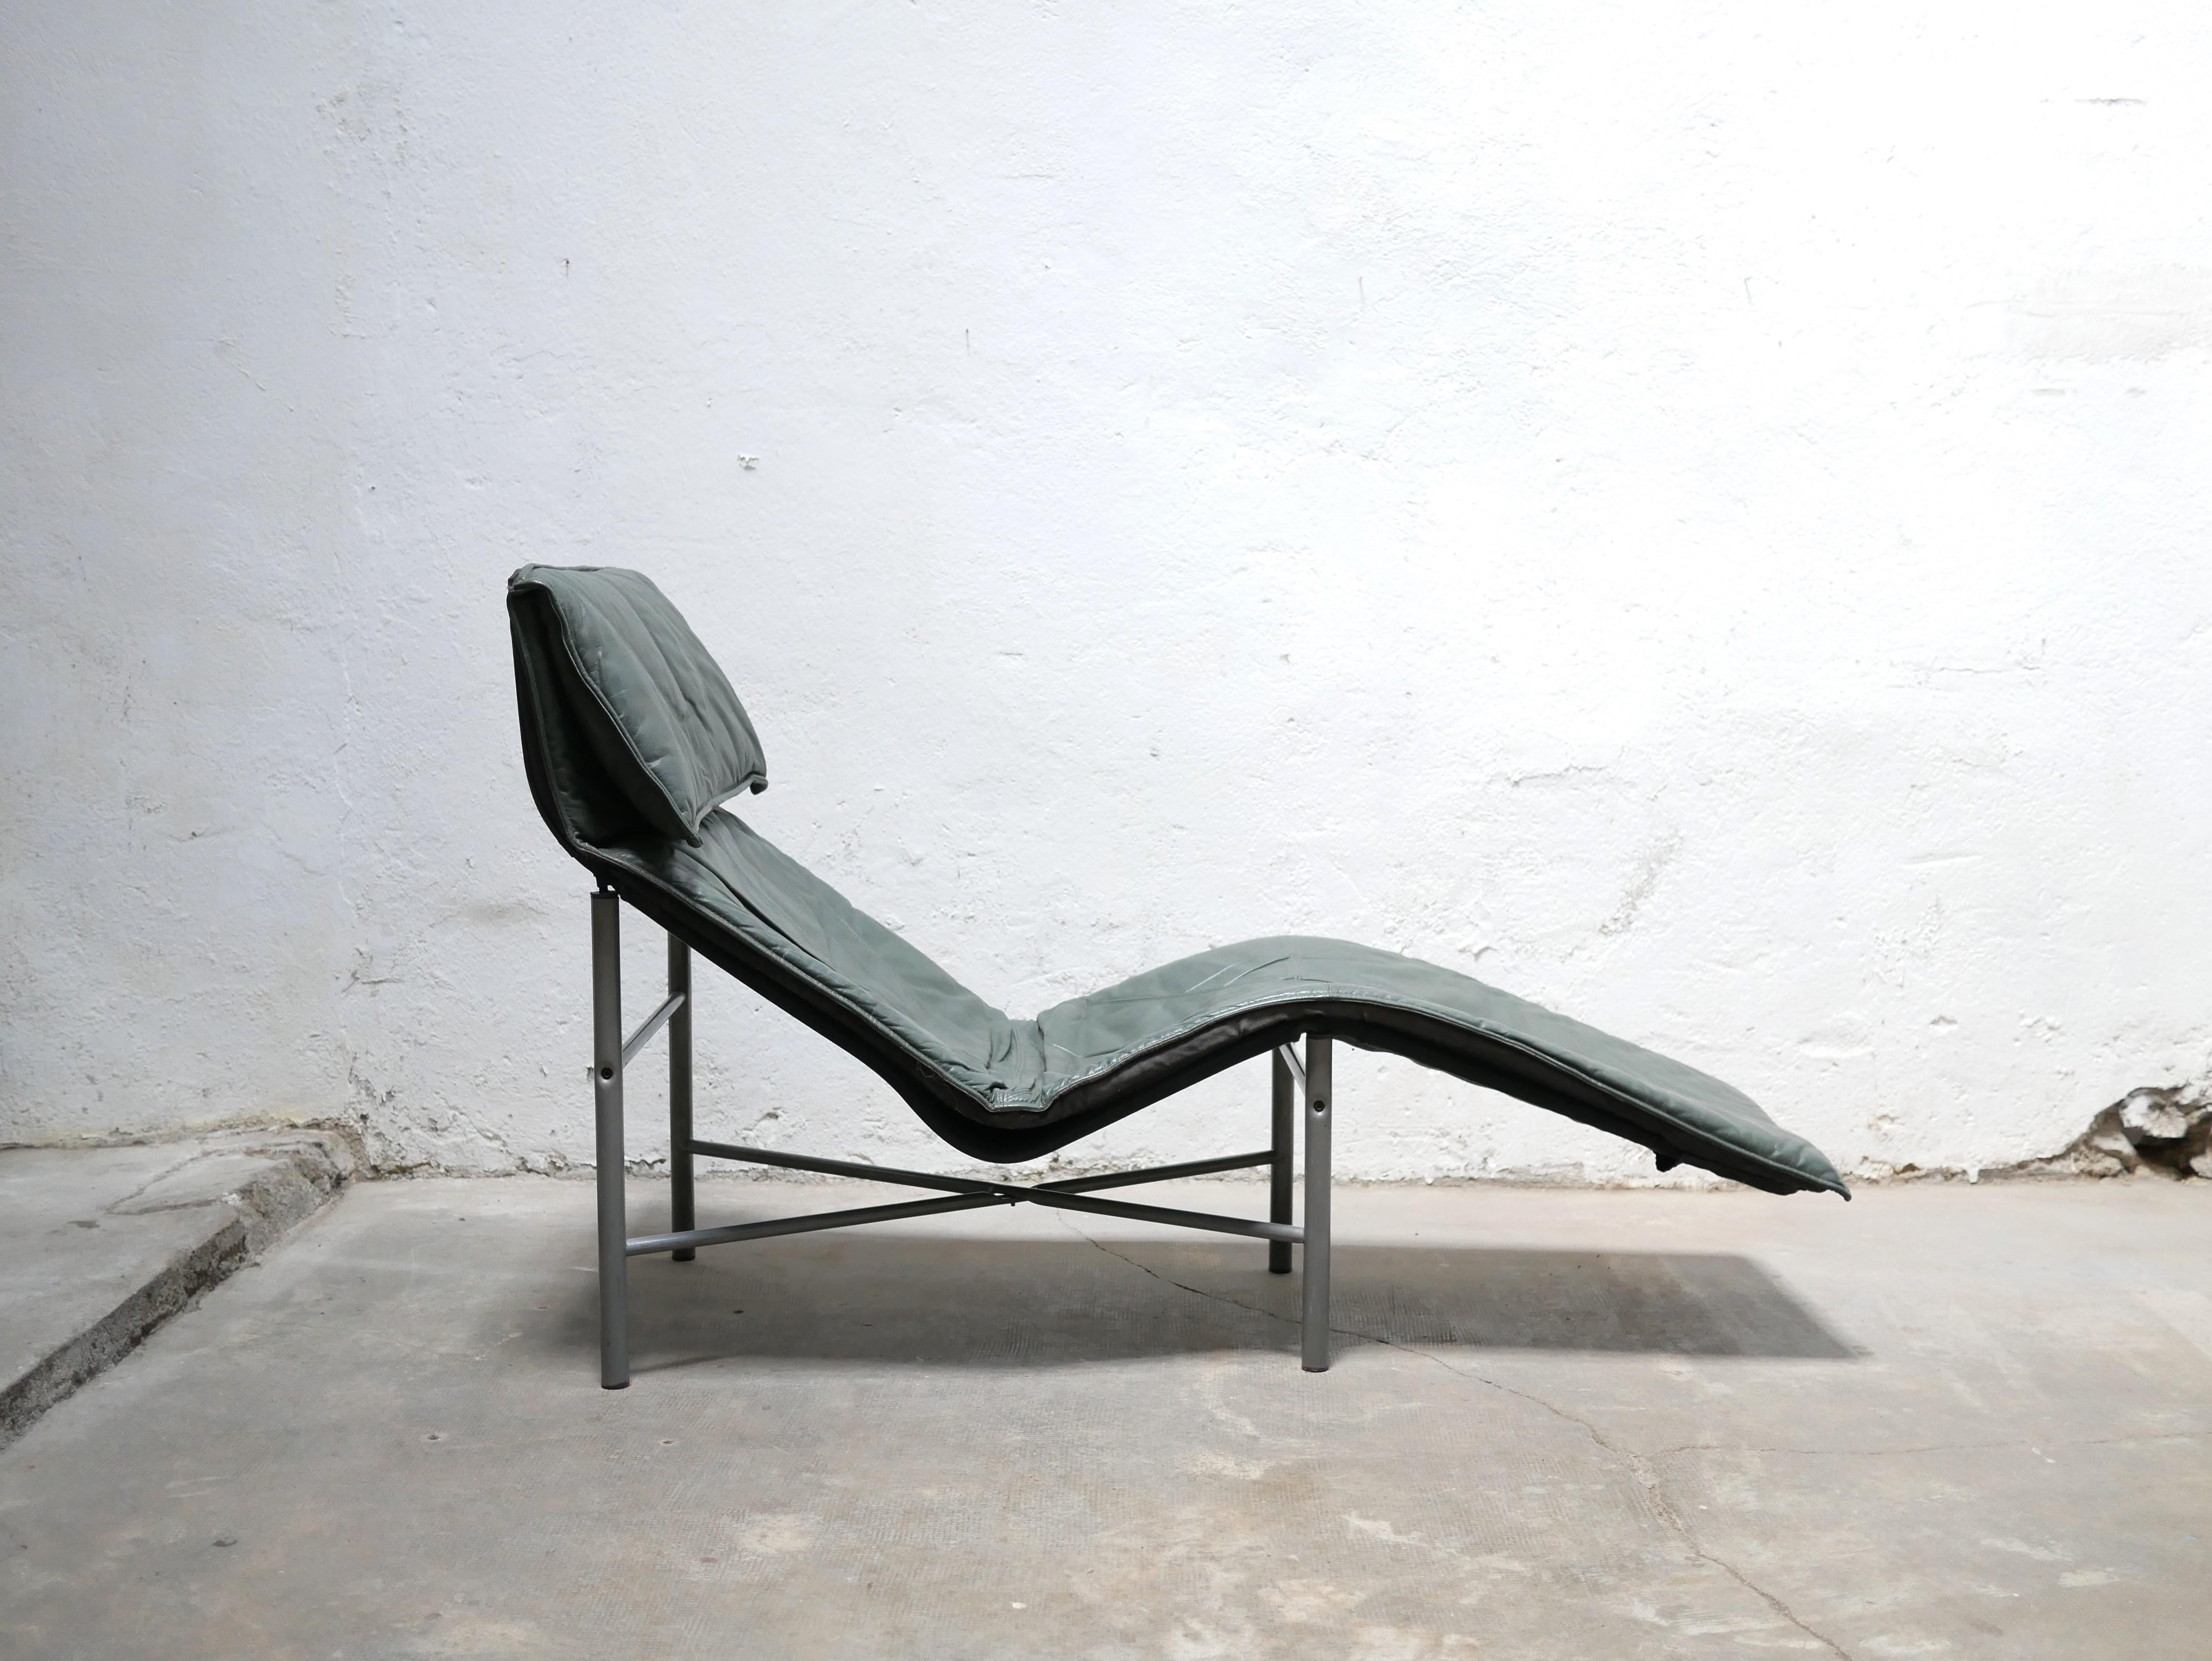 Scandinavian armchair, “Skye” model, designed by Tord Björklund for Ikea, Sweden in the 1980s.

Design and aesthetic, the lounge chair in pine green leather is also very comfortable. It perfectly follows the lines of the body for ideal support.
The